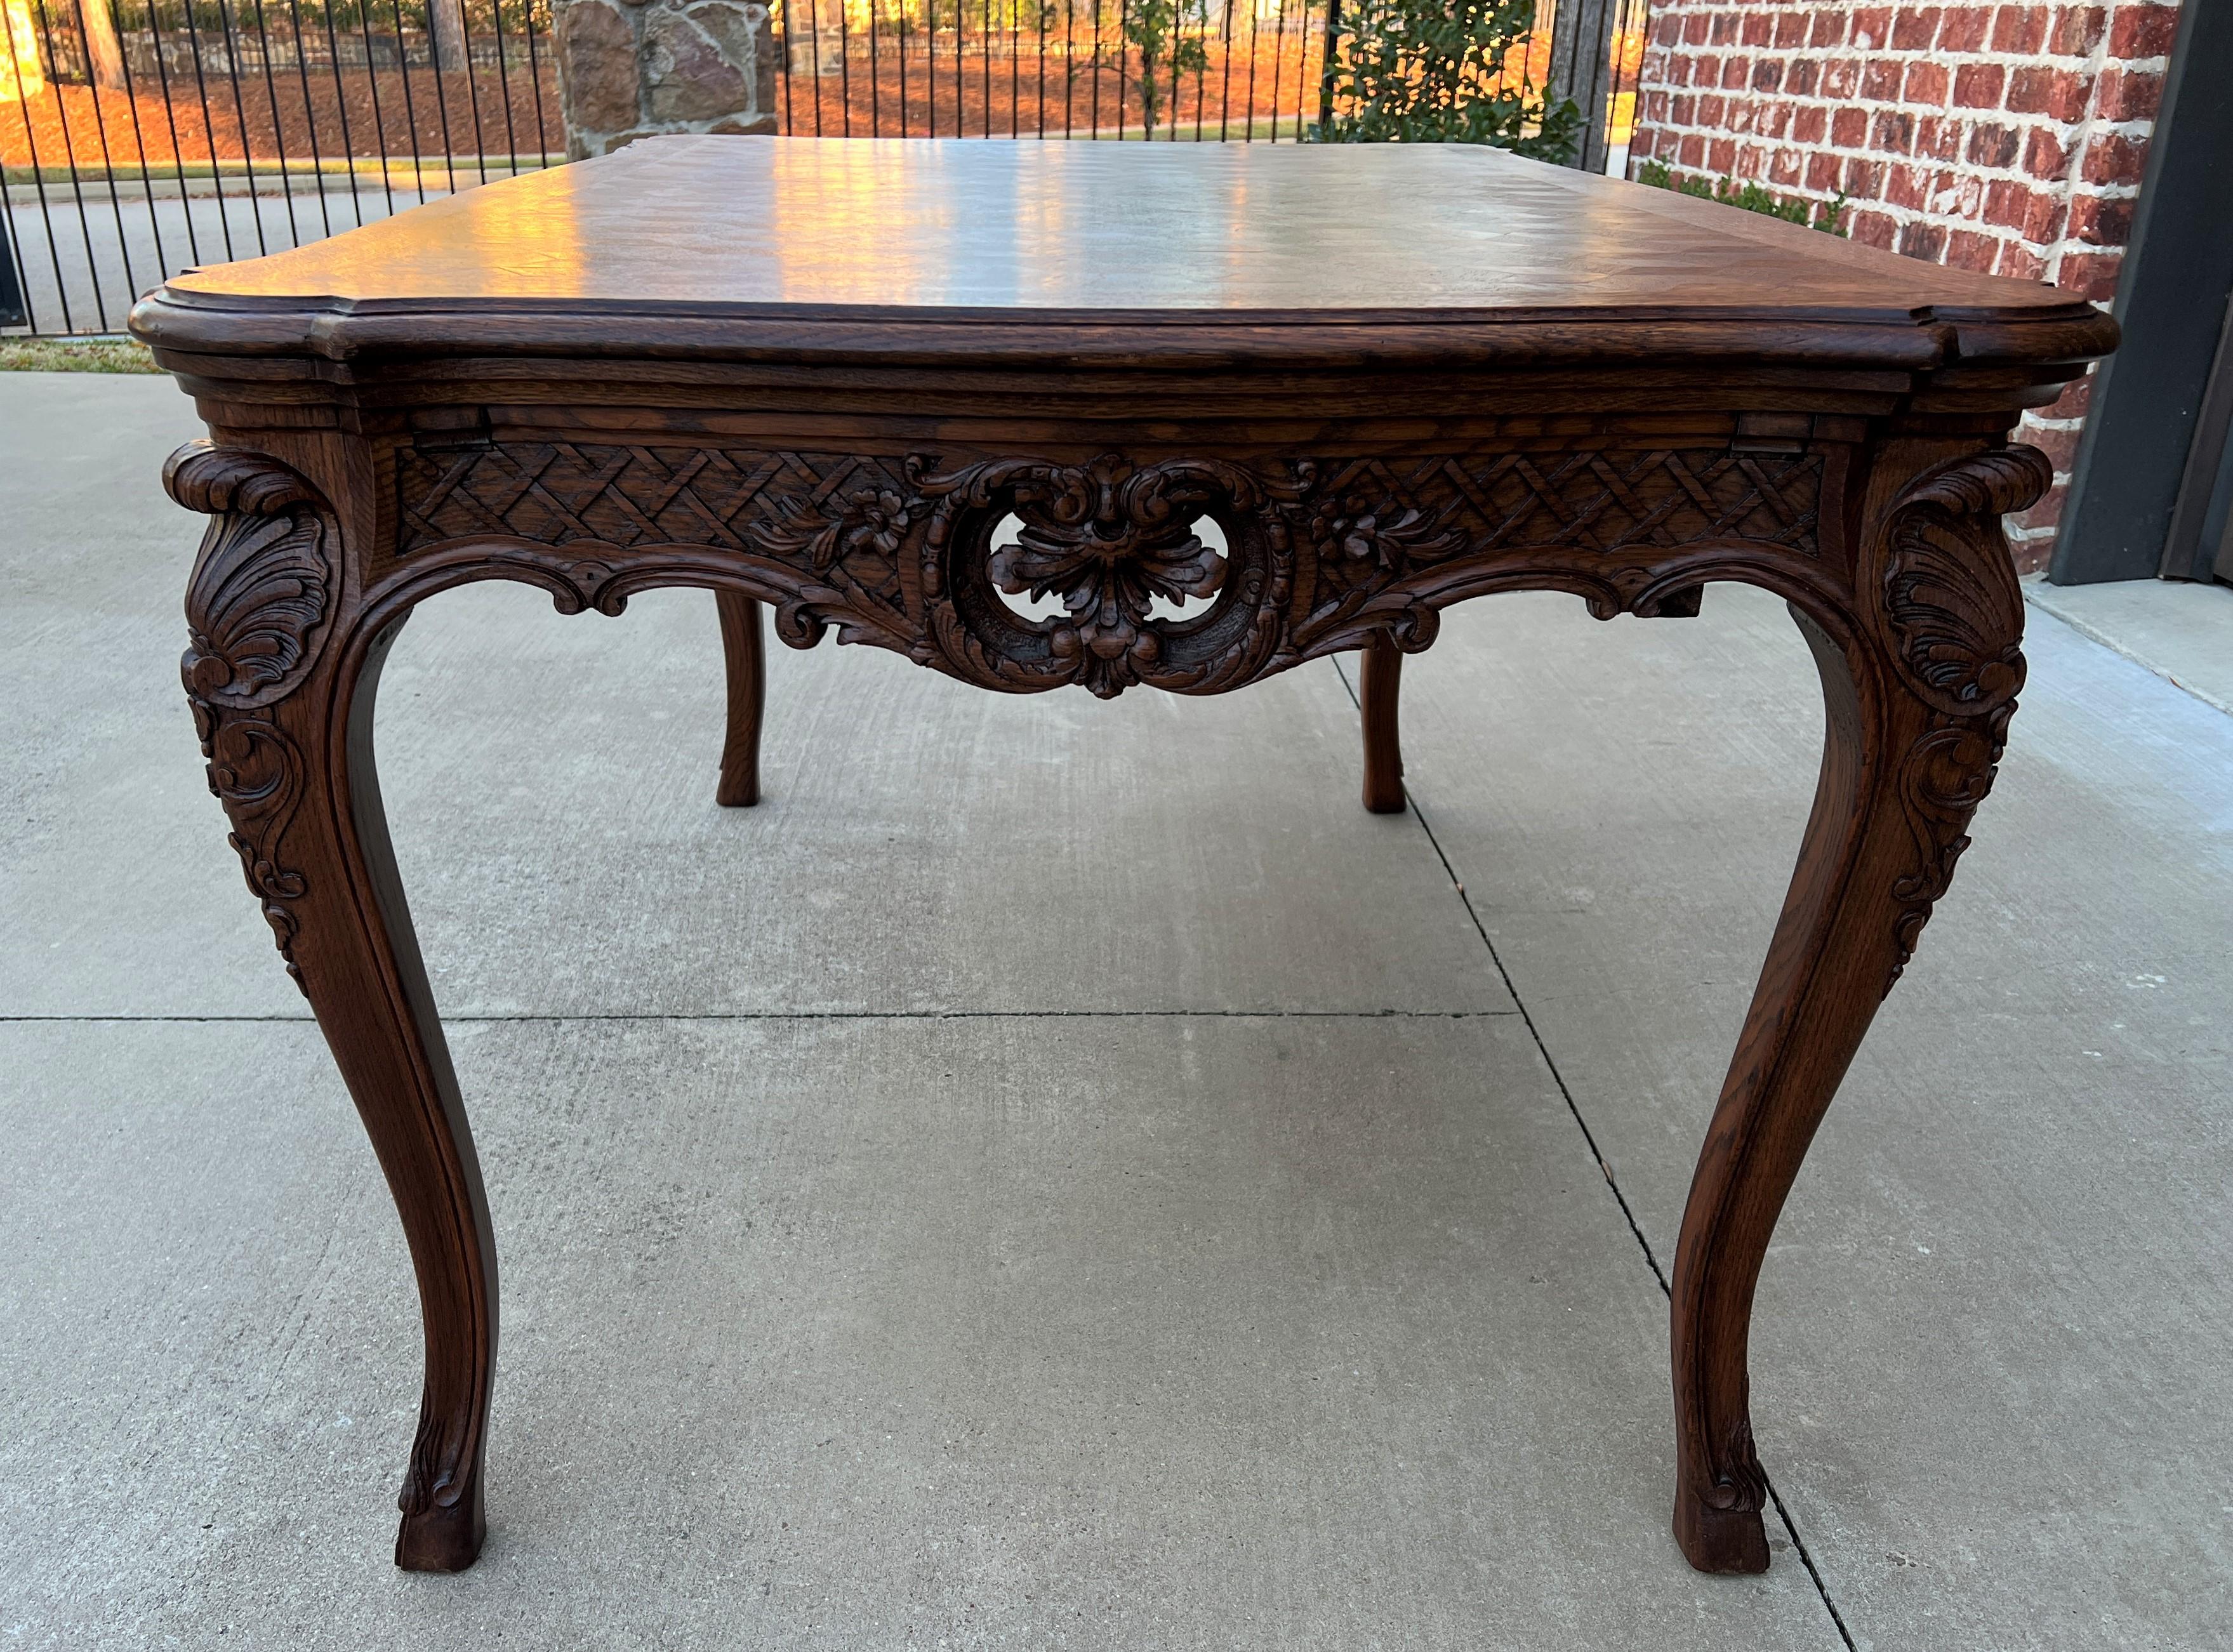 French Provincial Antique French Table Dining Breakfast Table Desk Draw Leaf Carved Oak Parquet For Sale